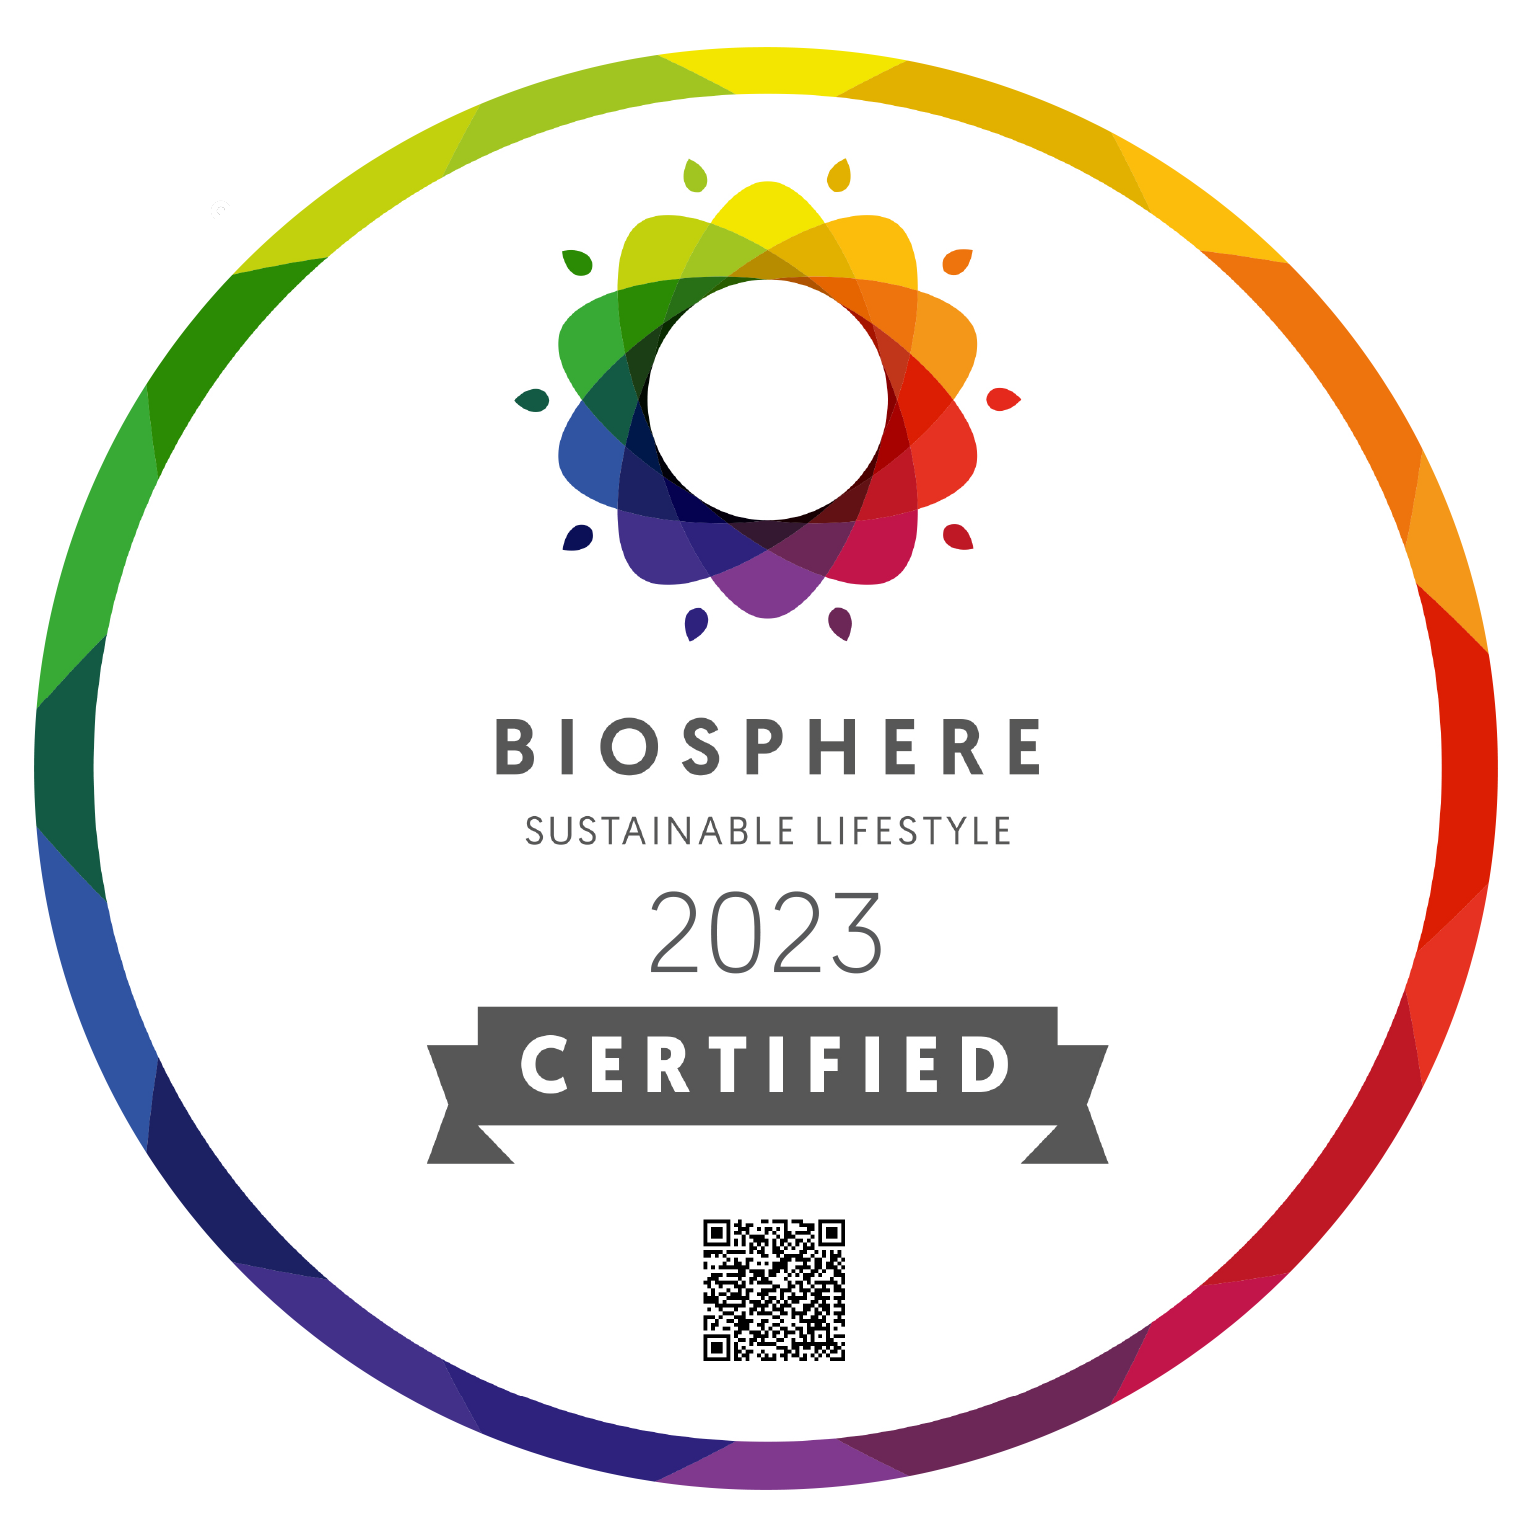 Official logo of the Biosphere certification.